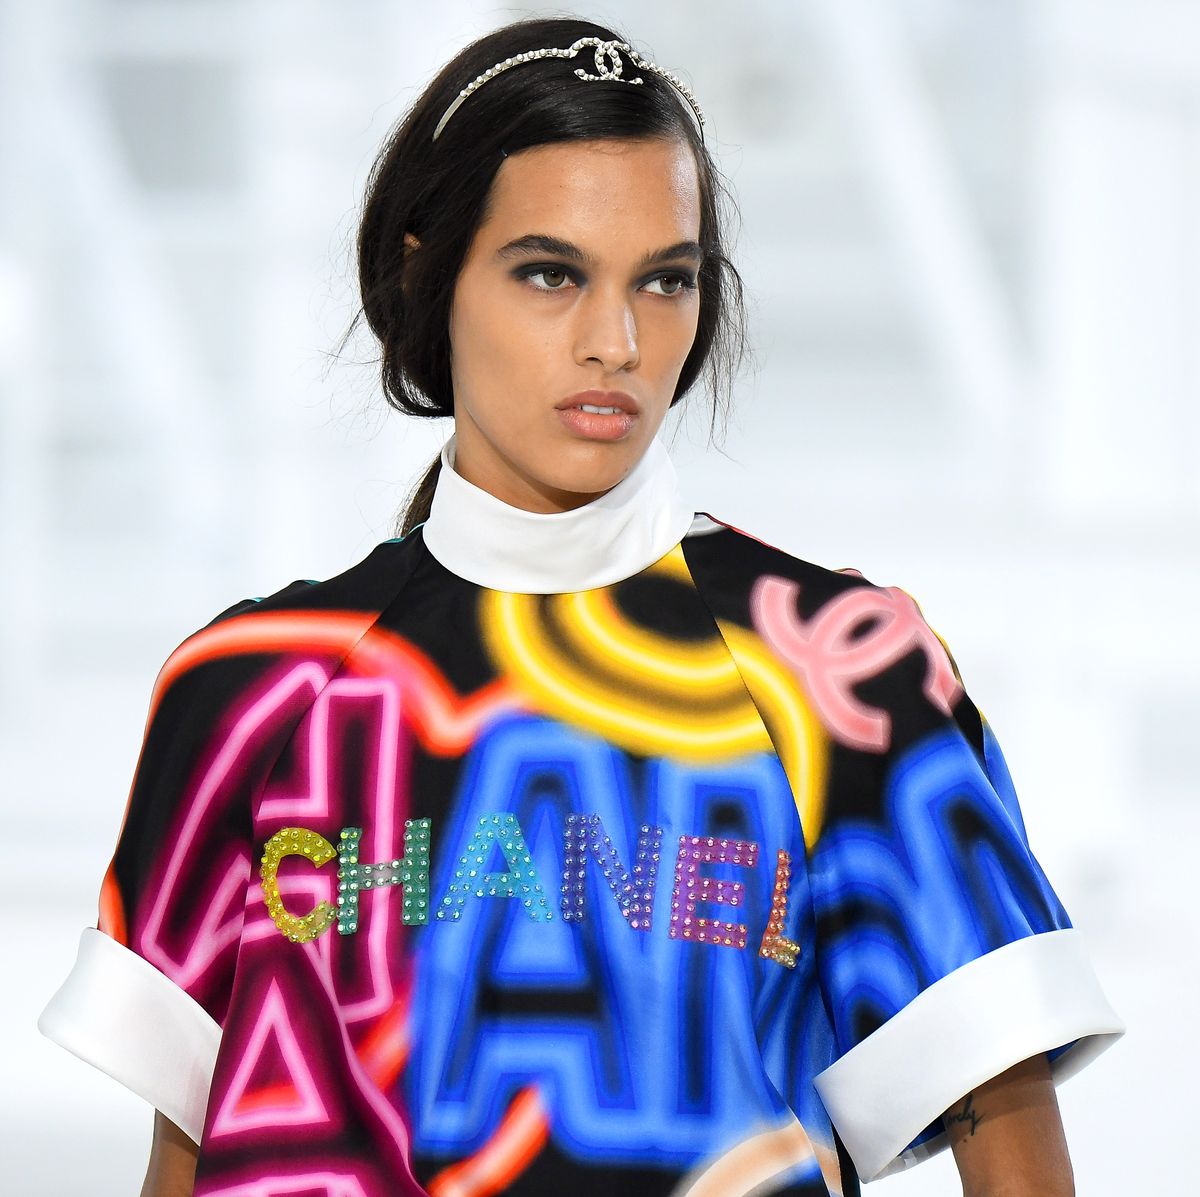 LOGO CHANEL SHIRT FROM 2021 SPRING COLLECTION